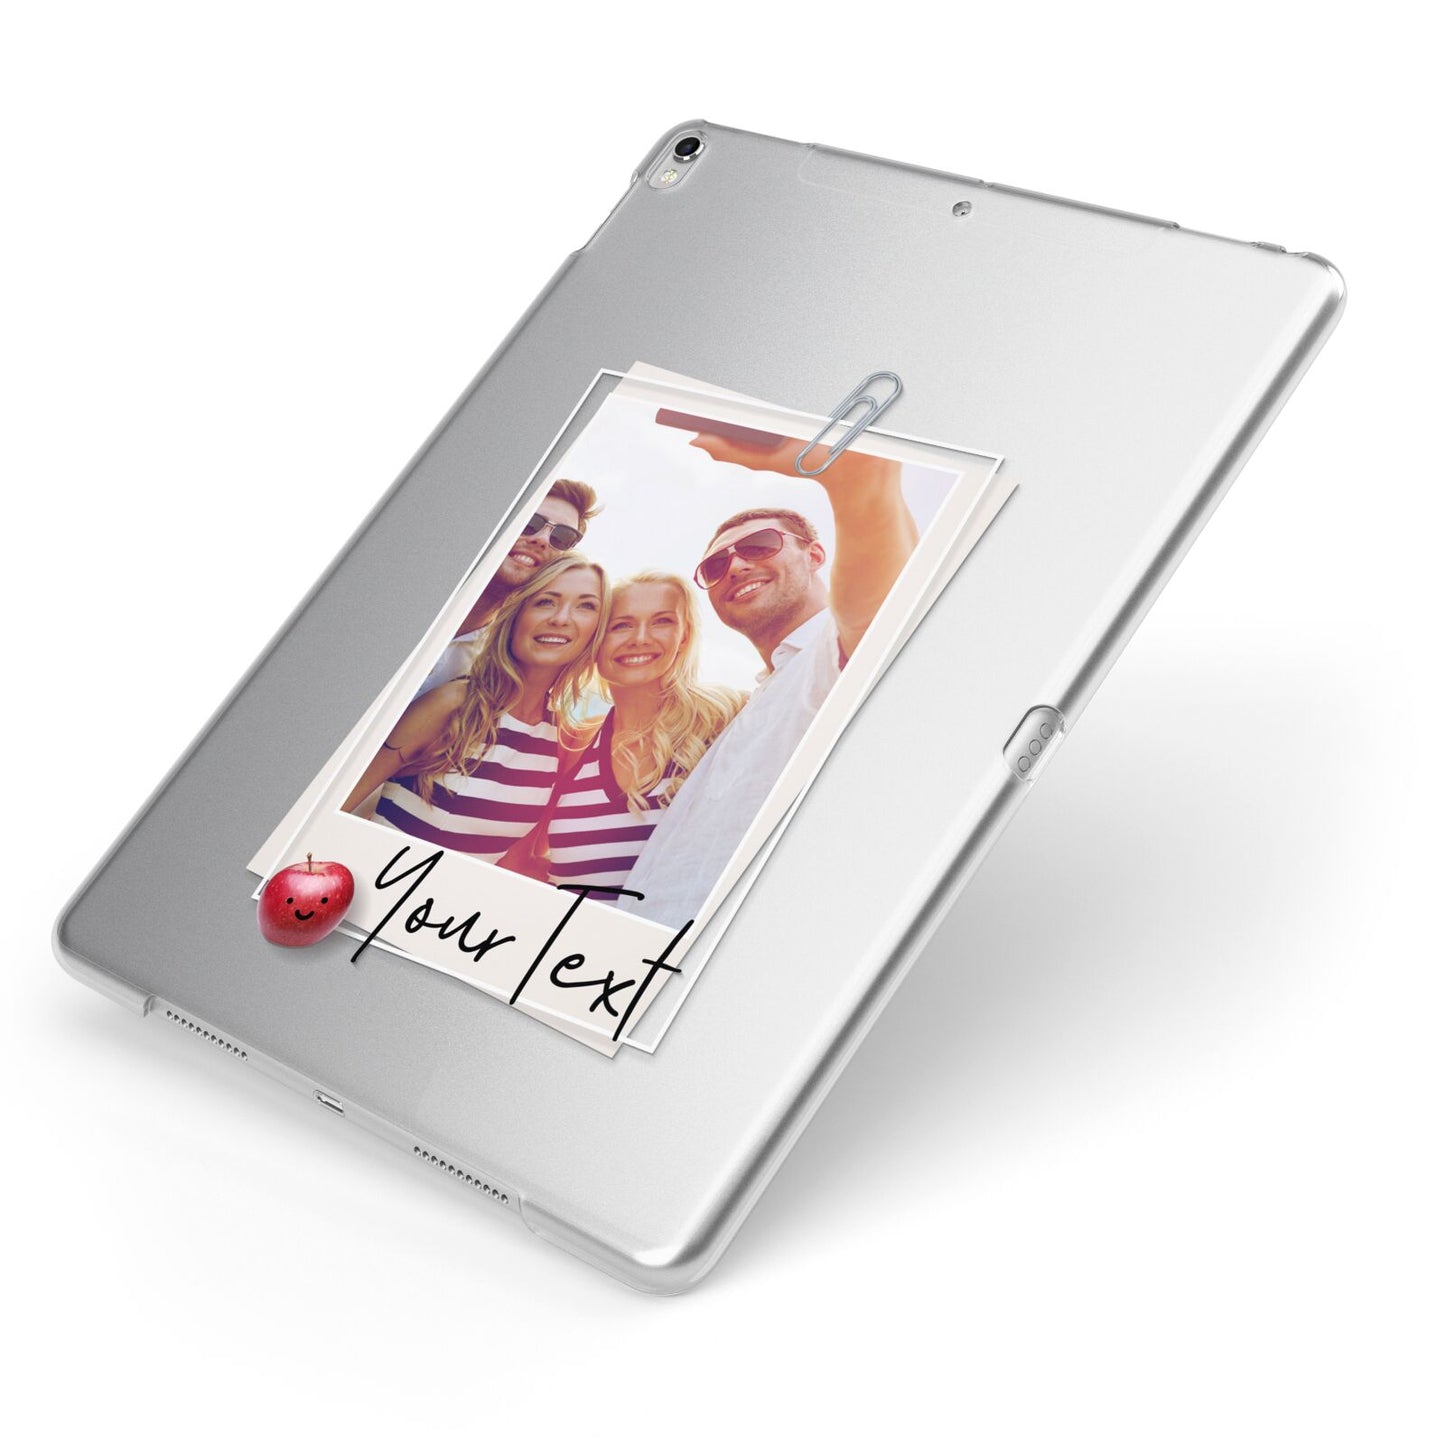 Photograph and Name Apple iPad Case on Silver iPad Side View